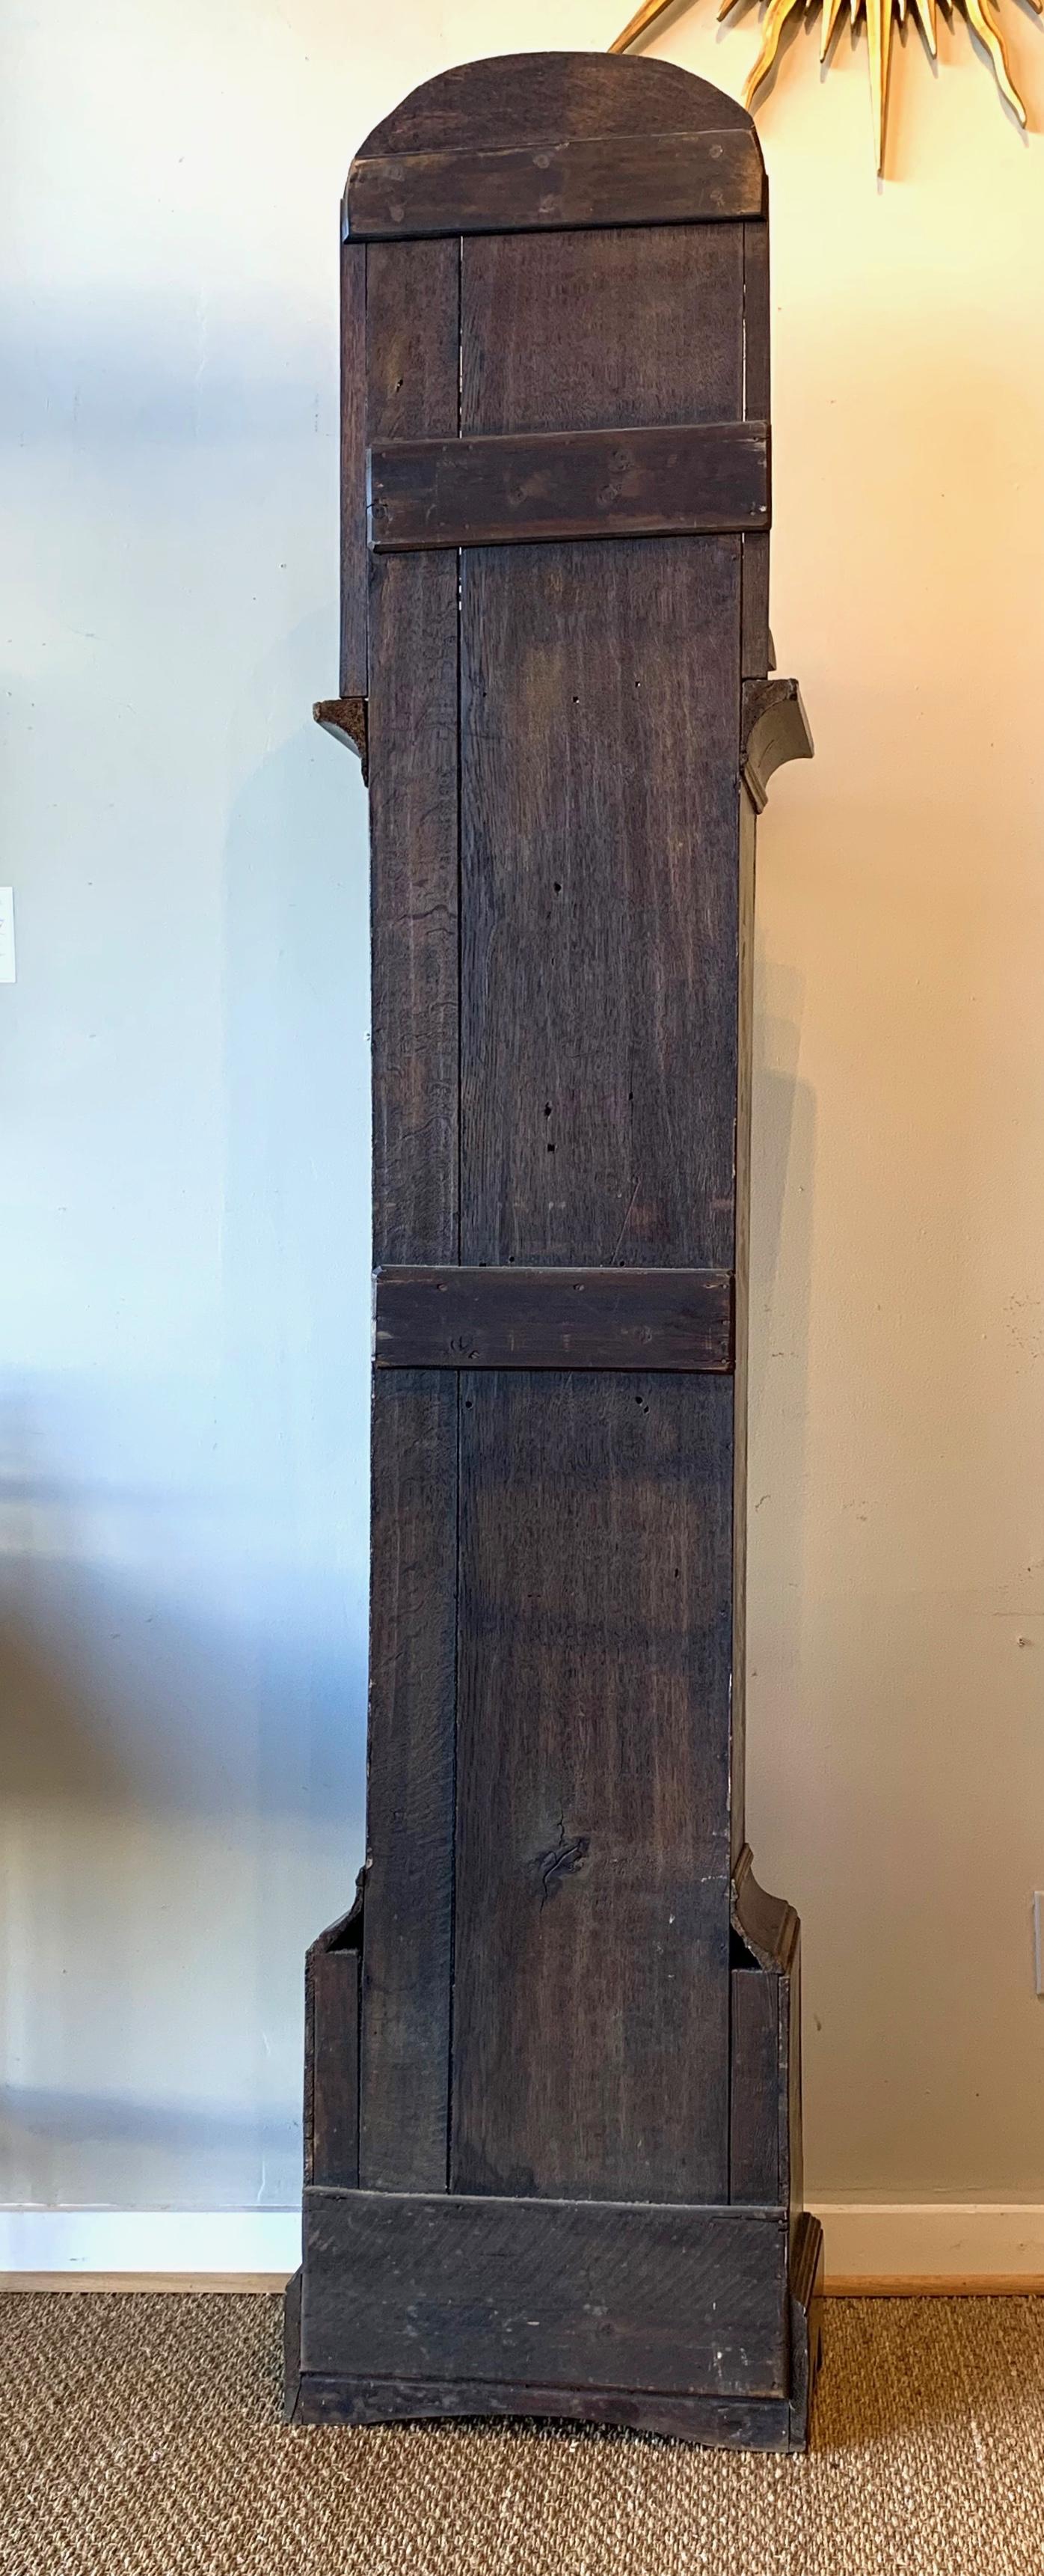 Wood Mid-18th Century English Chinoiserie Decorated Tall Case Clock